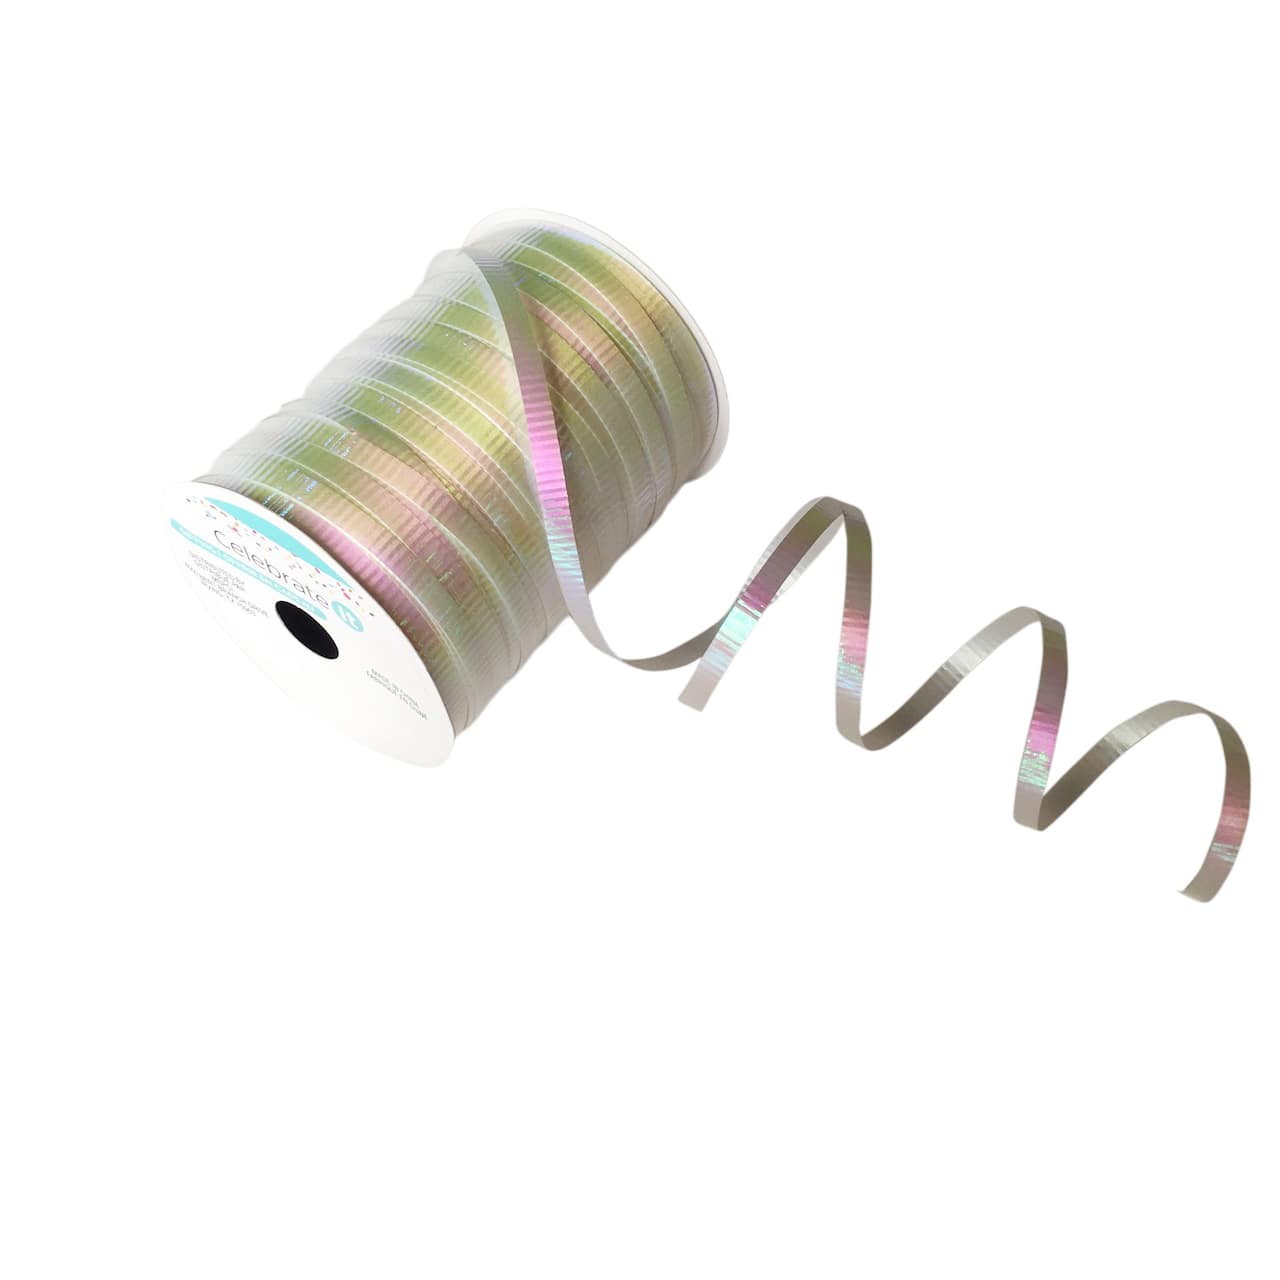 12 Pack: 3/16 Iridescent White Curling Ribbon by Celebrate It